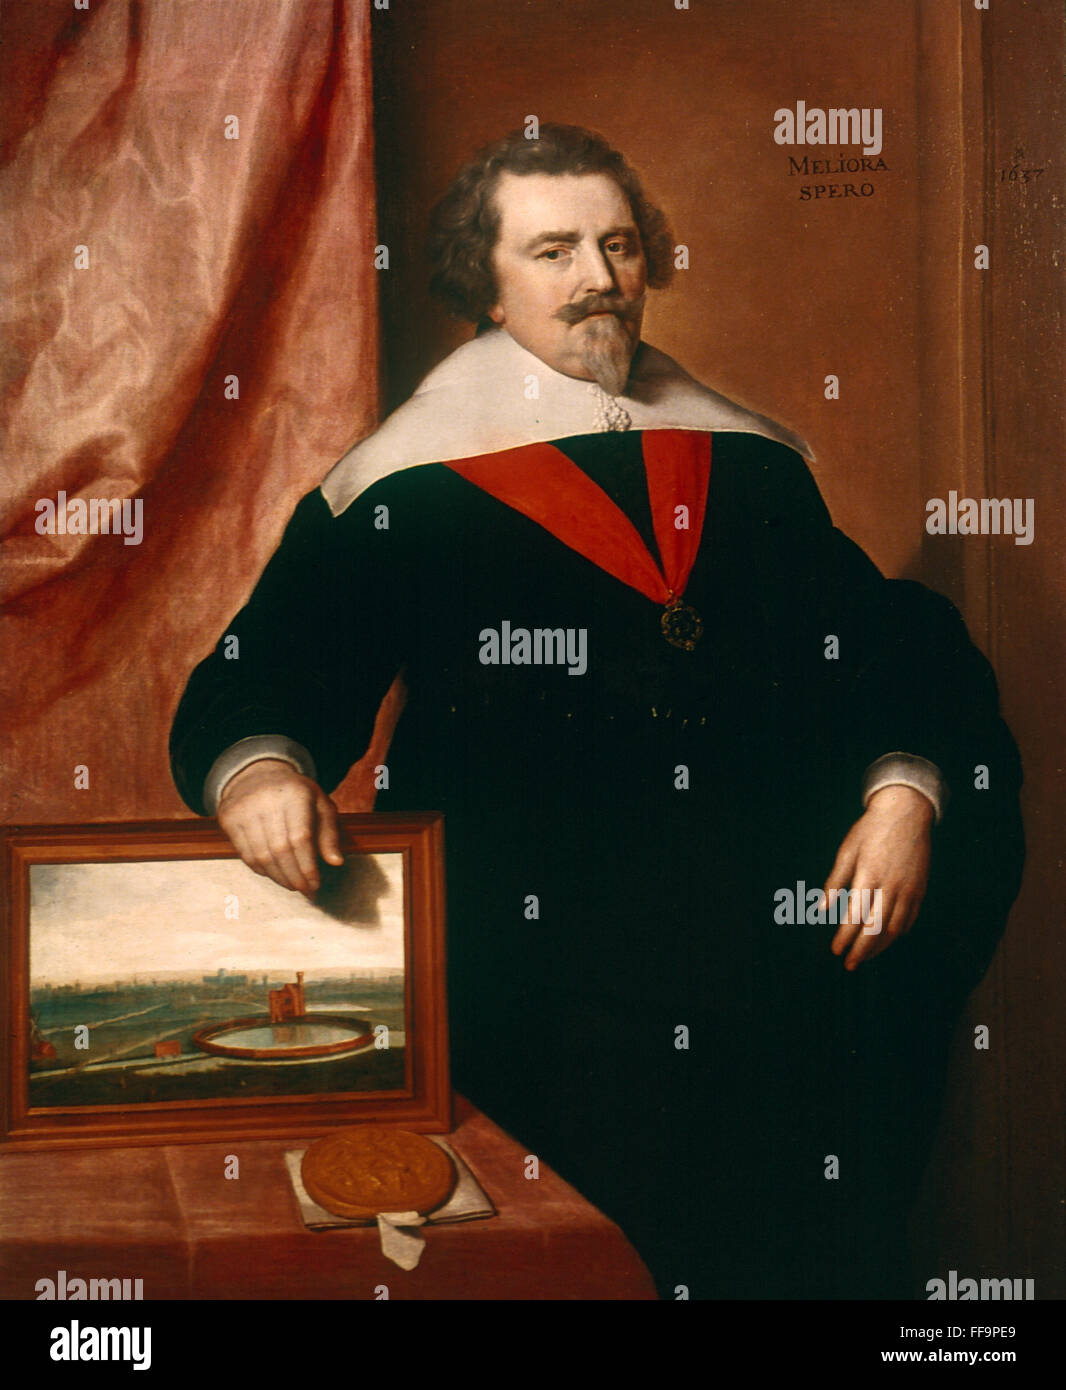 SIR JOHN BACKHOUSE /n(1582-1649). English landowner and politician. Wearing the badge of the Order of Bath while standing next to a painting of the New River Company reservoir that had been built on his property in Islington. Oil on canvas, 1637, by 'VM.' Stock Photo